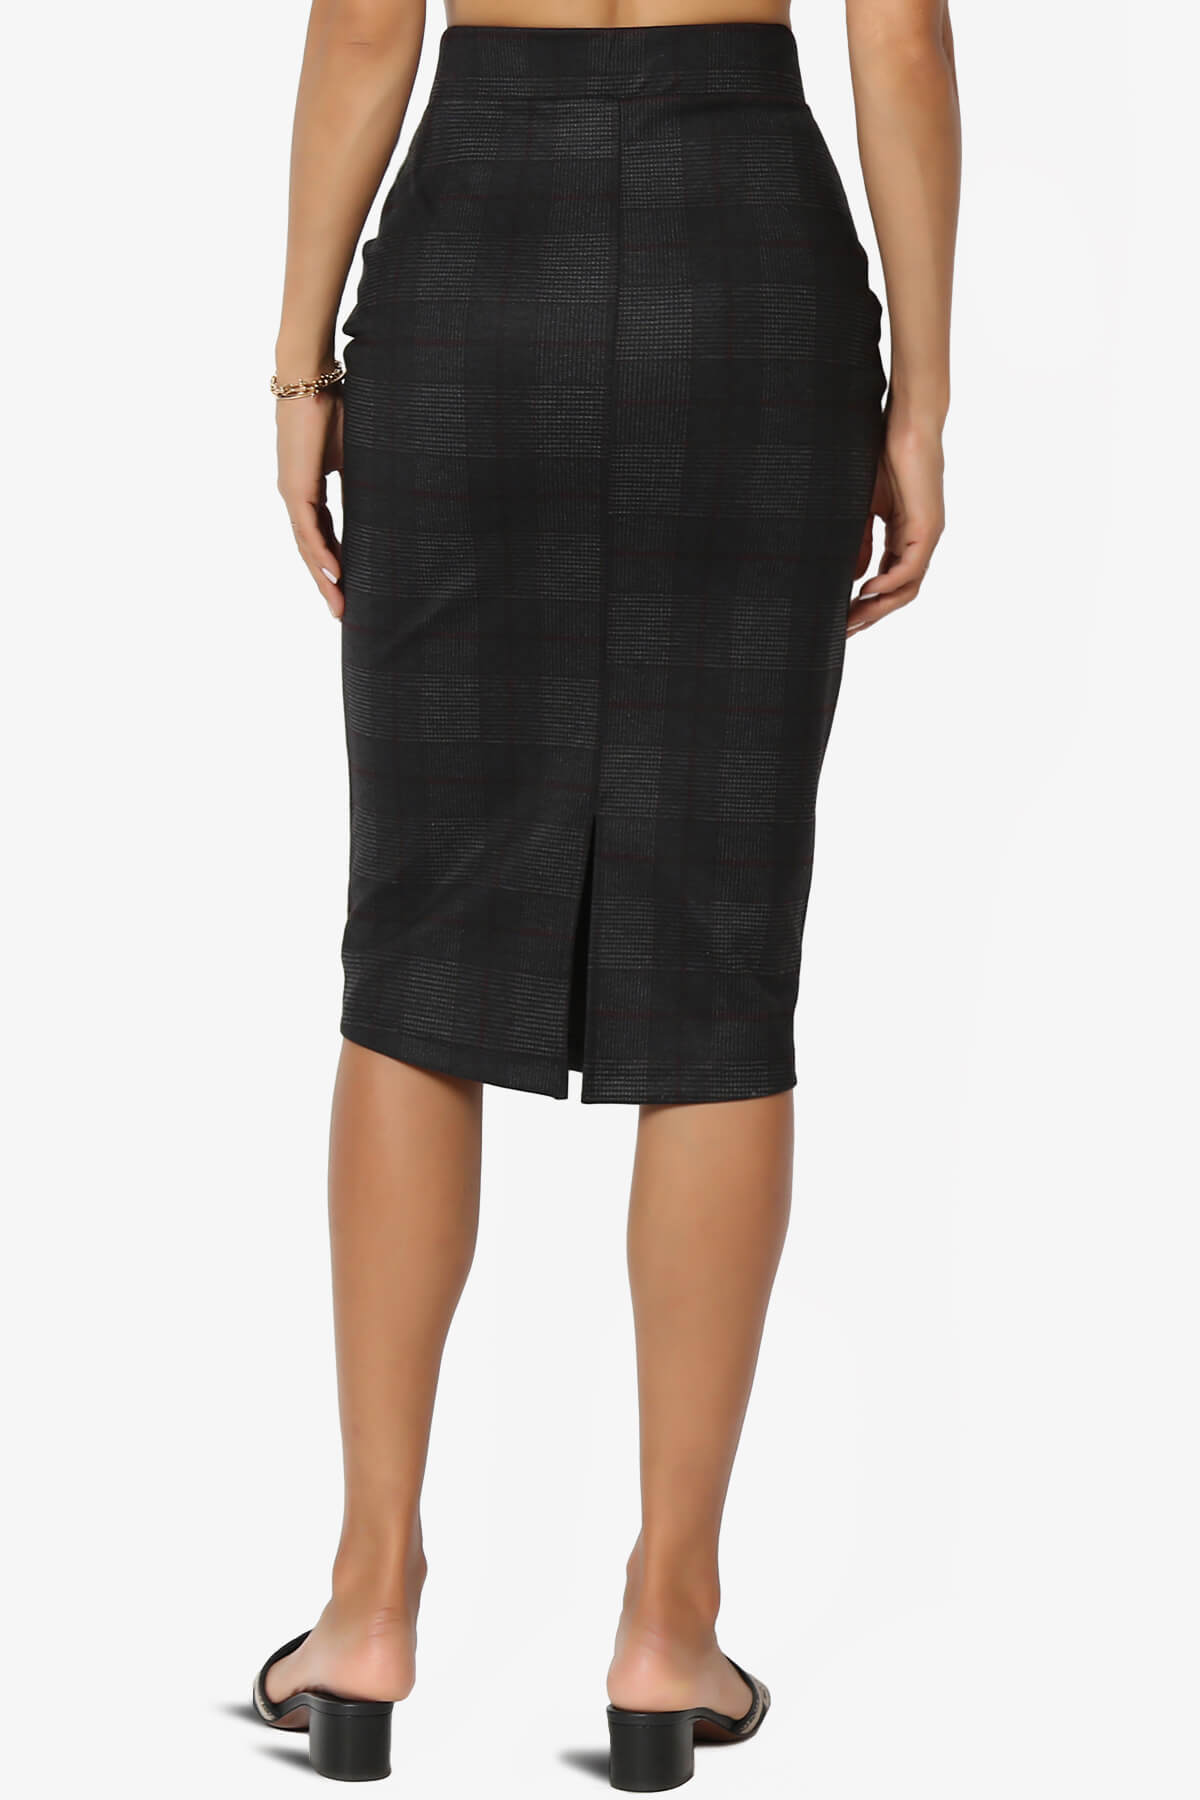 Load image into Gallery viewer, Reese Plaid Pencil Skirt DARK GREY_2
